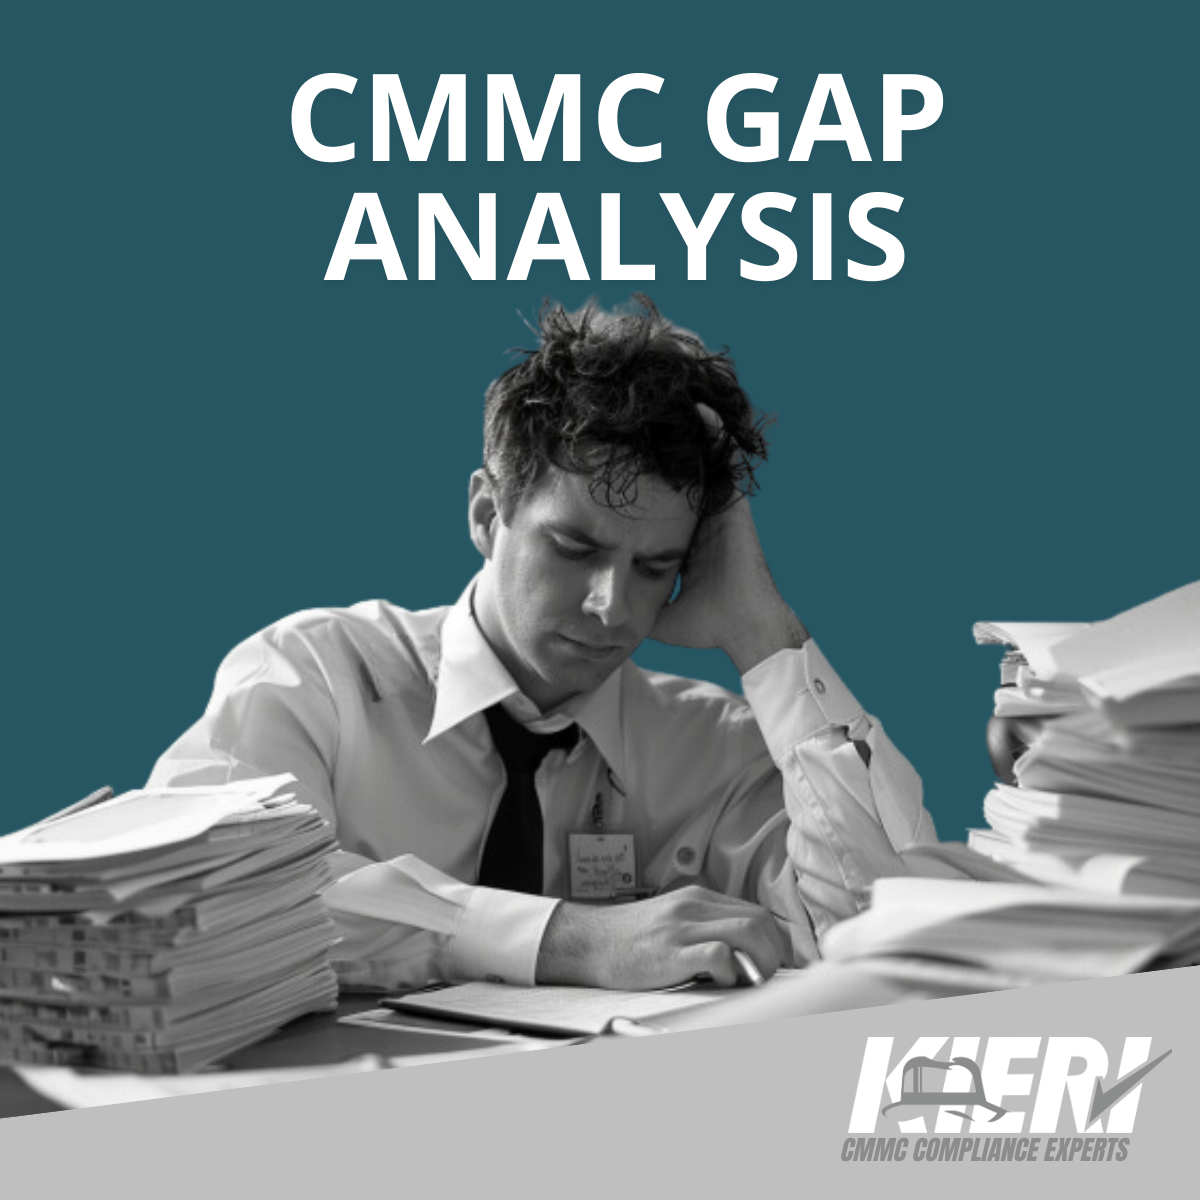 CMMC Level 2 and 800-171 Assessments and Gap Analysis